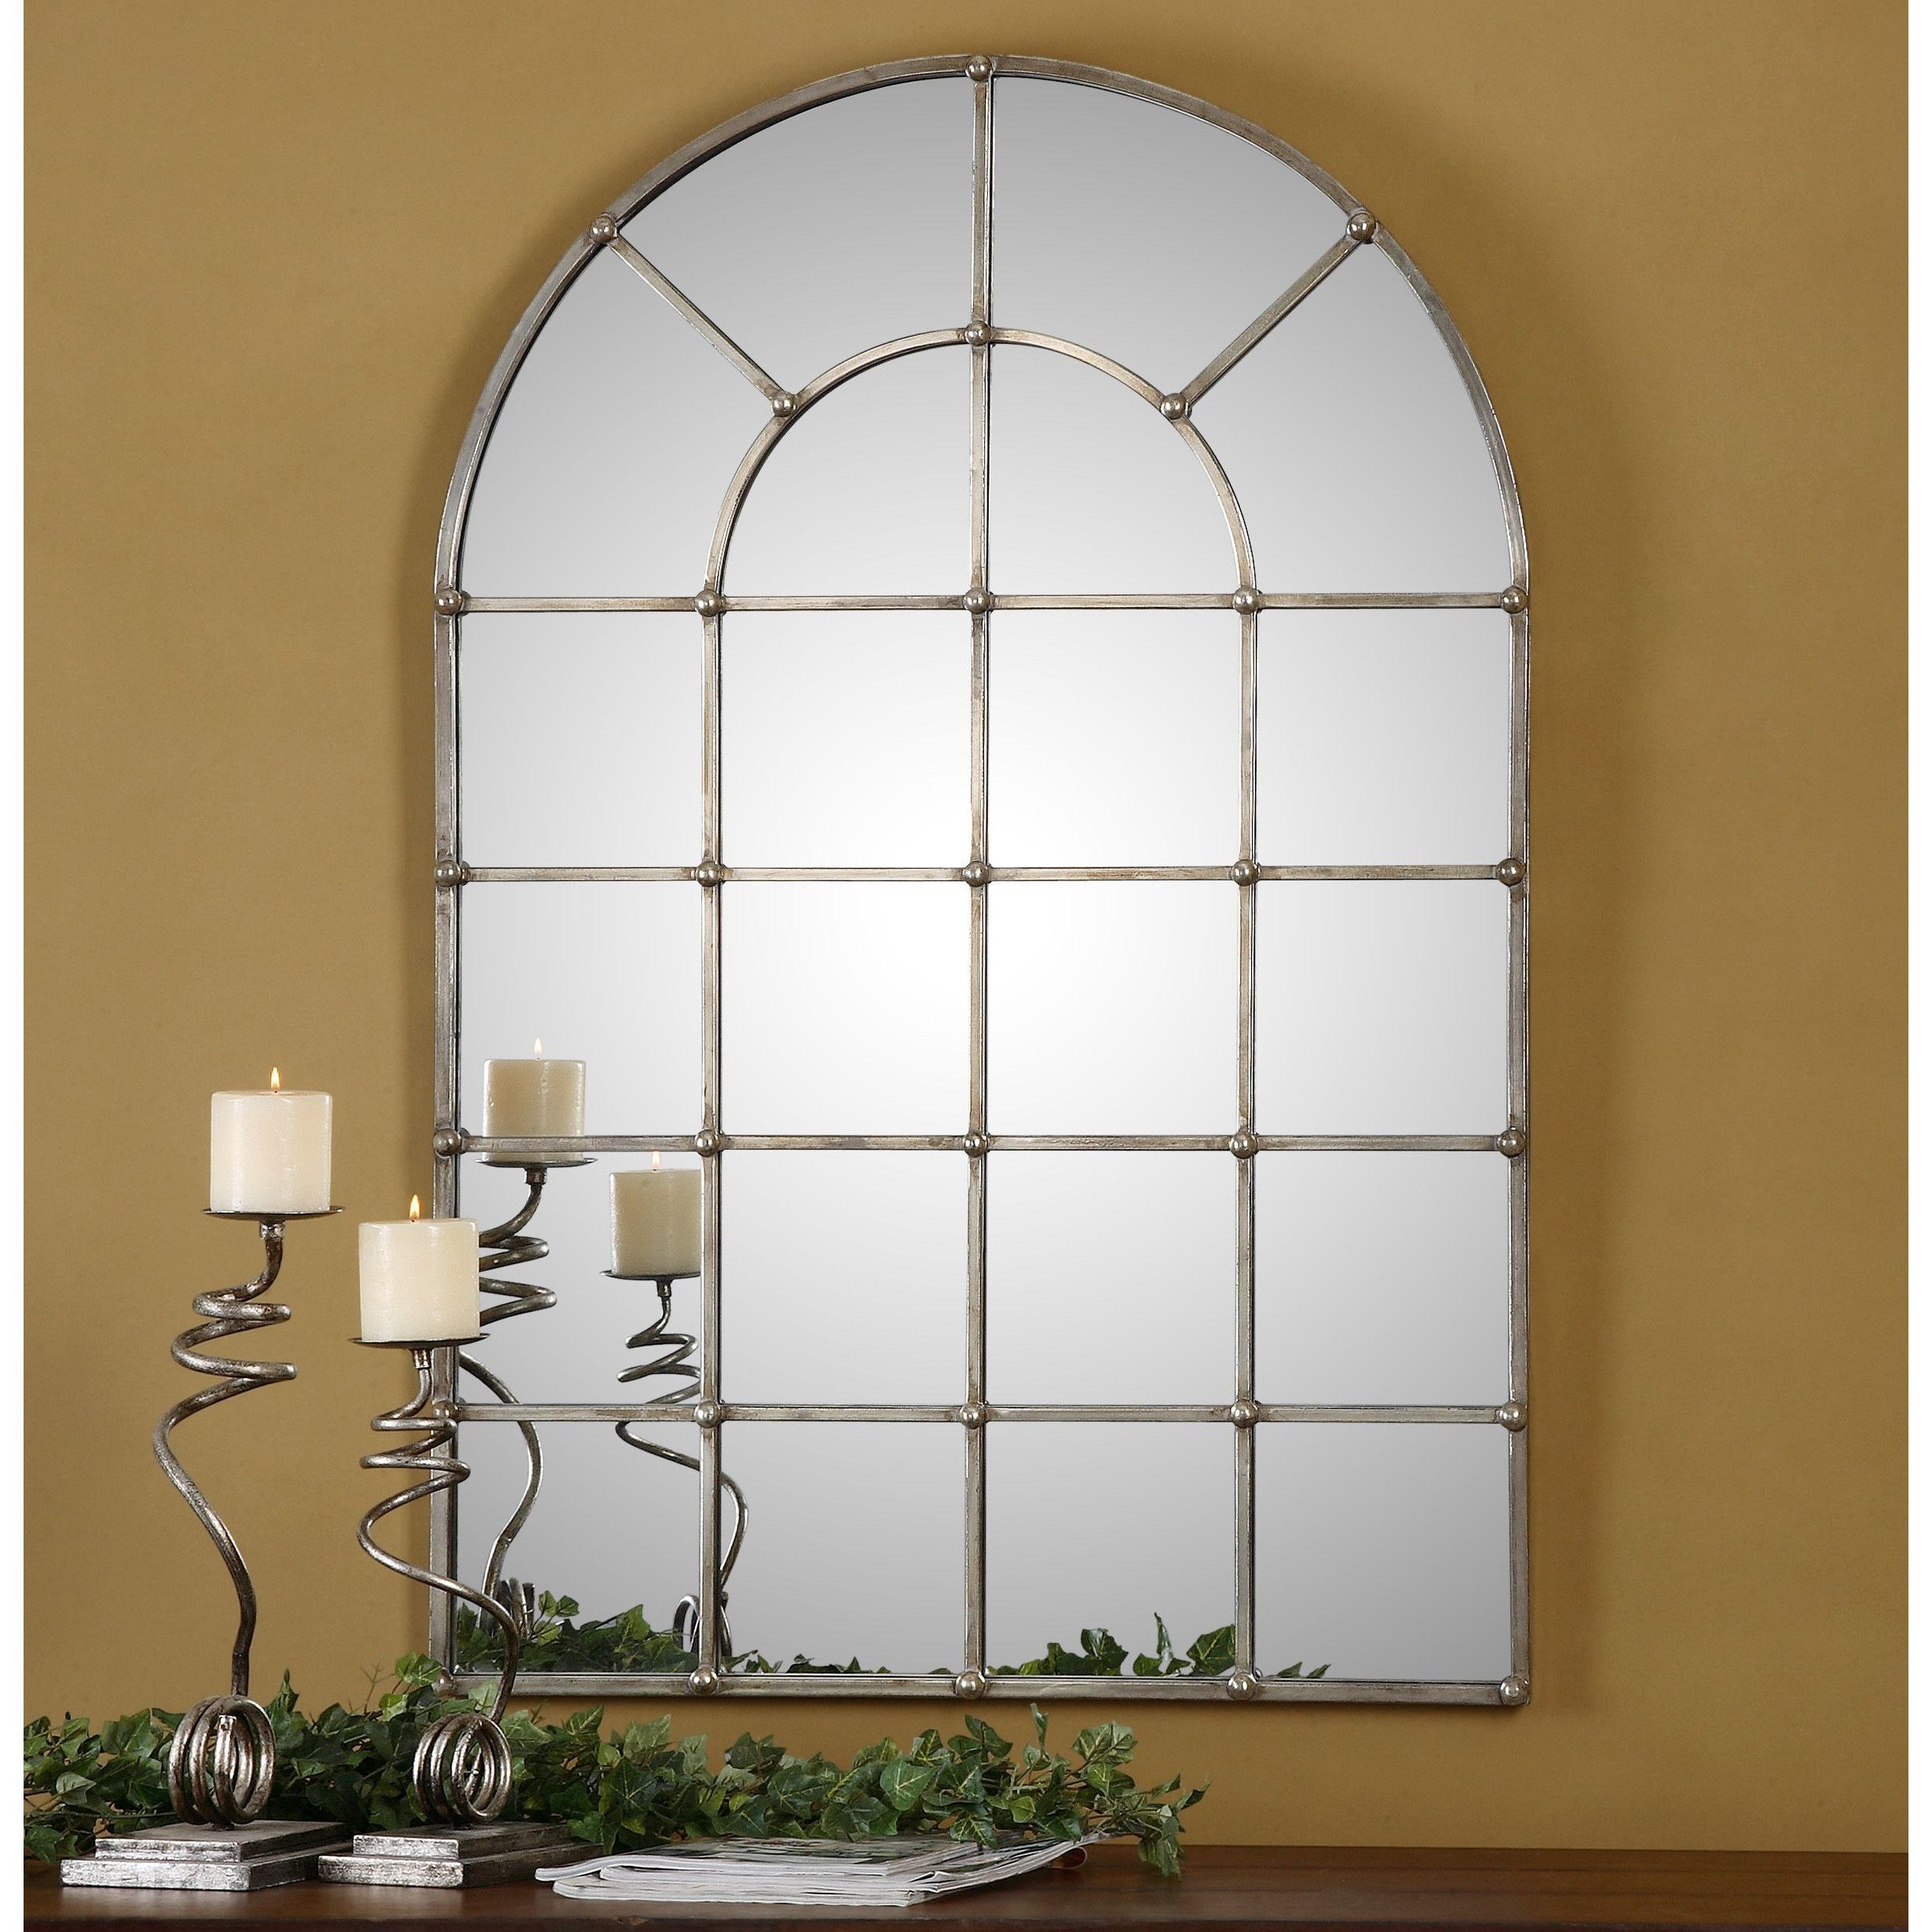 Uttermost Barwell Arch Window Mirror Reviews Wayfair Stacy With Window Mirrors For Sale (View 13 of 15)